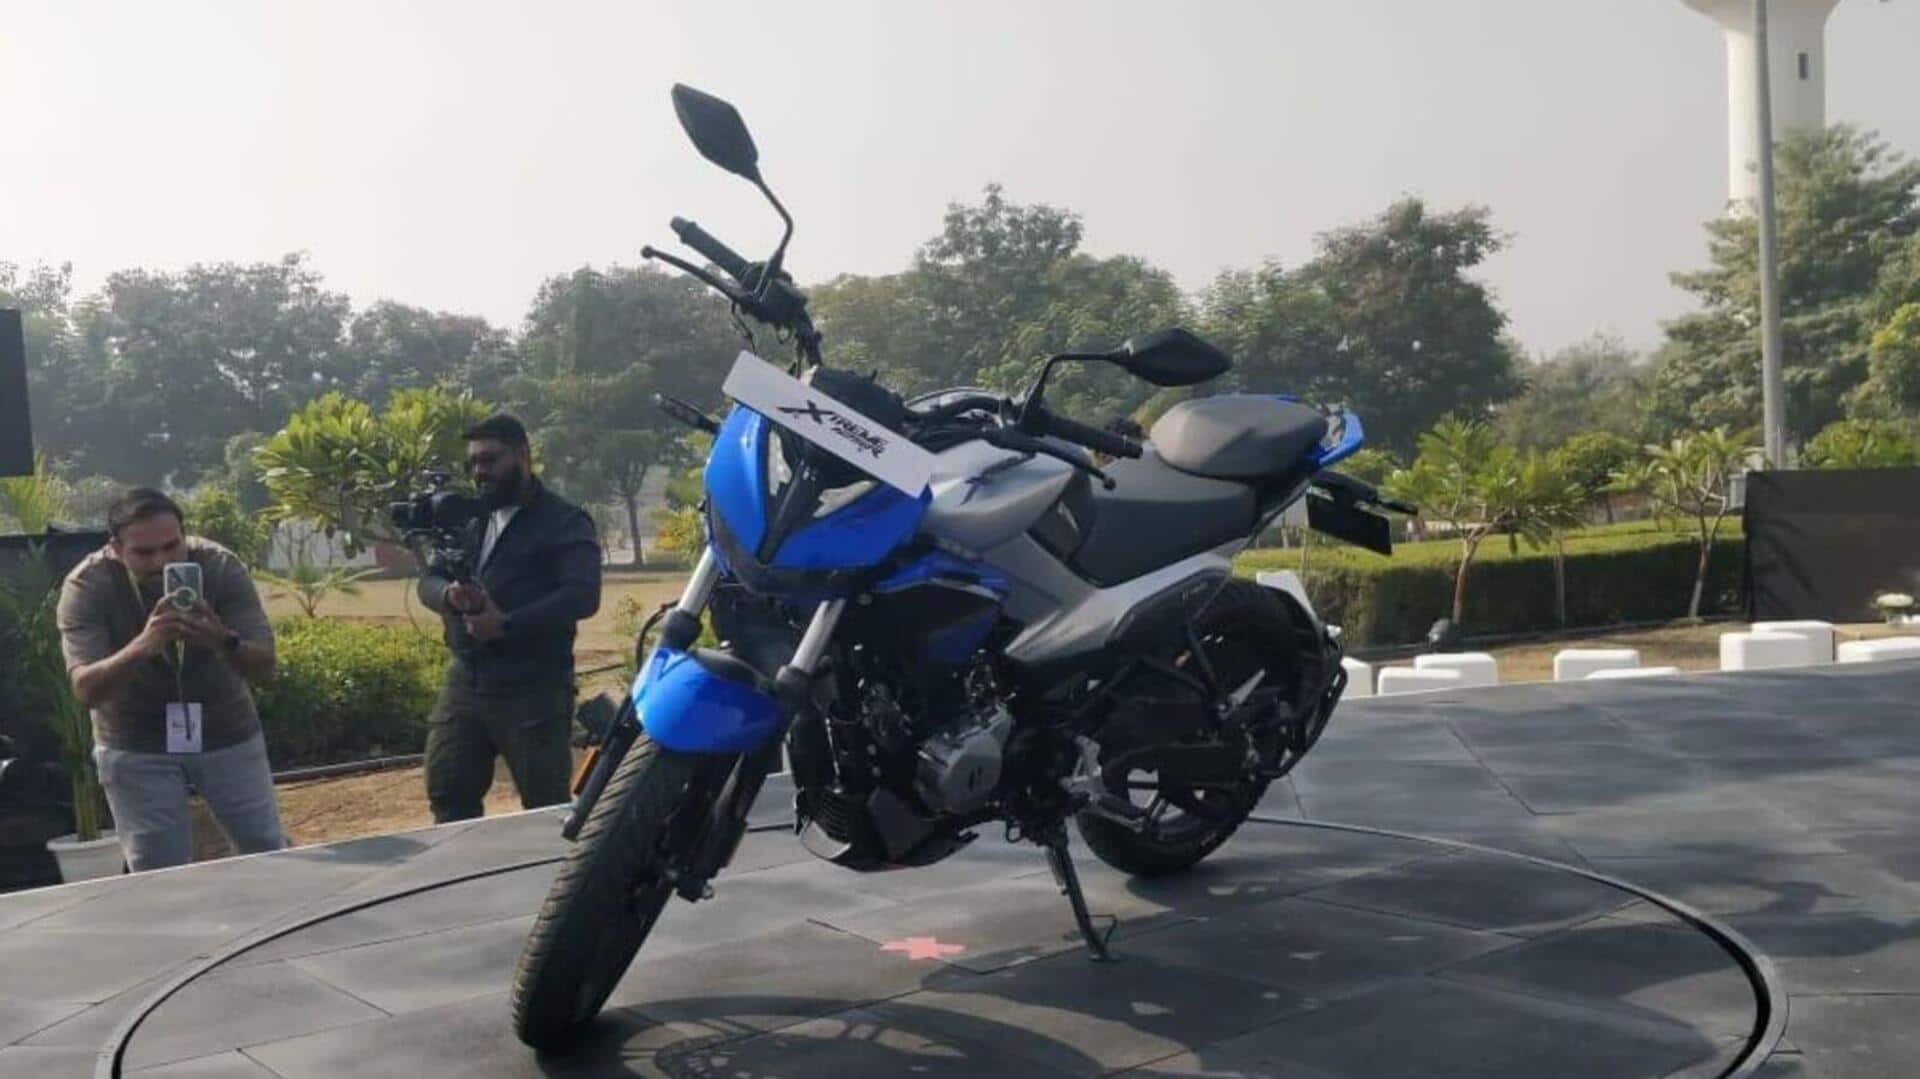 Hero MotoCorp launches Xtreme 125R in India at Rs. 95,000